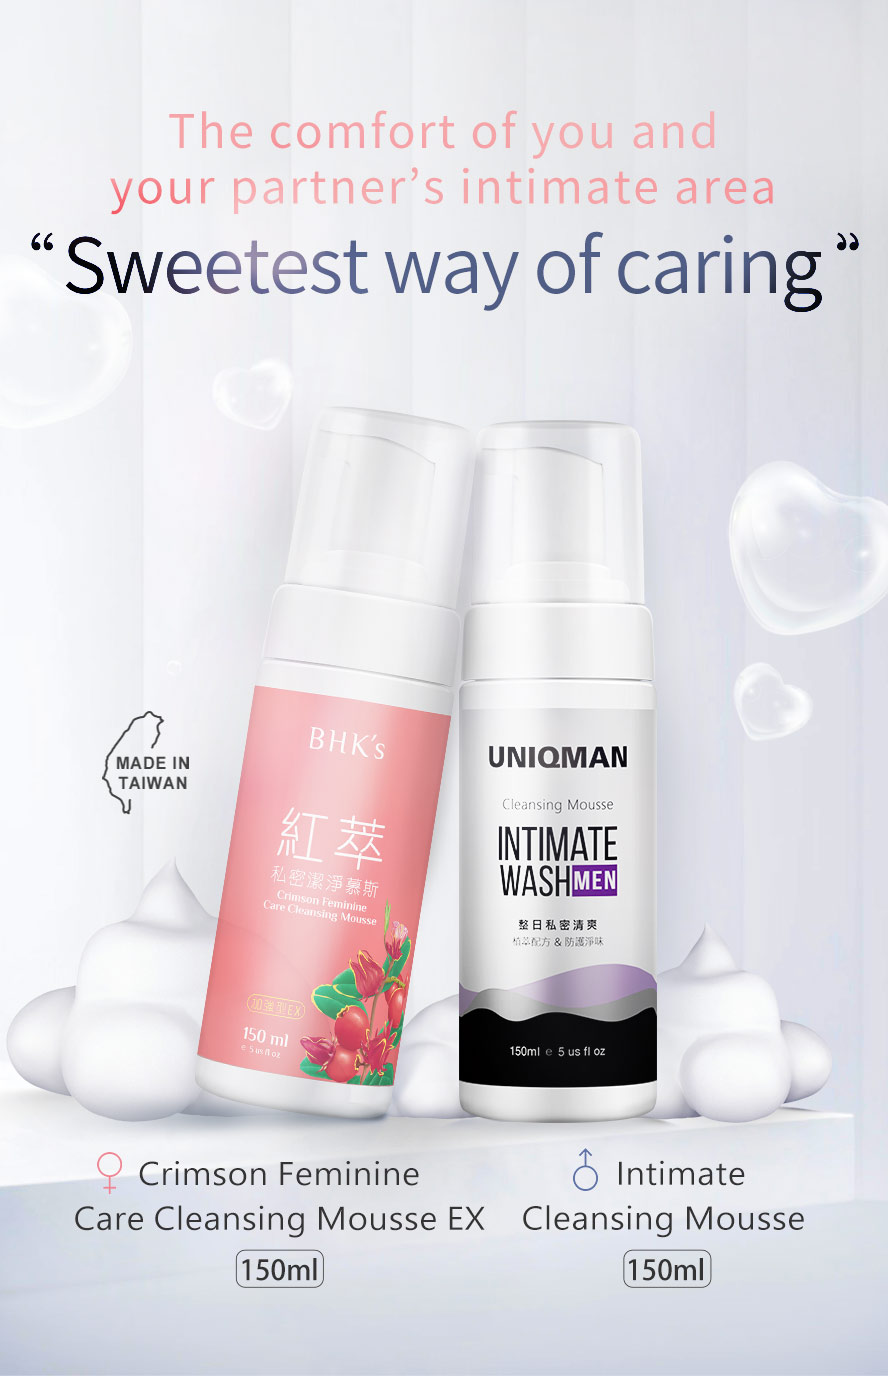 Intimate cleansing mousse stabilize pH, and alleviate and prevent irritation.